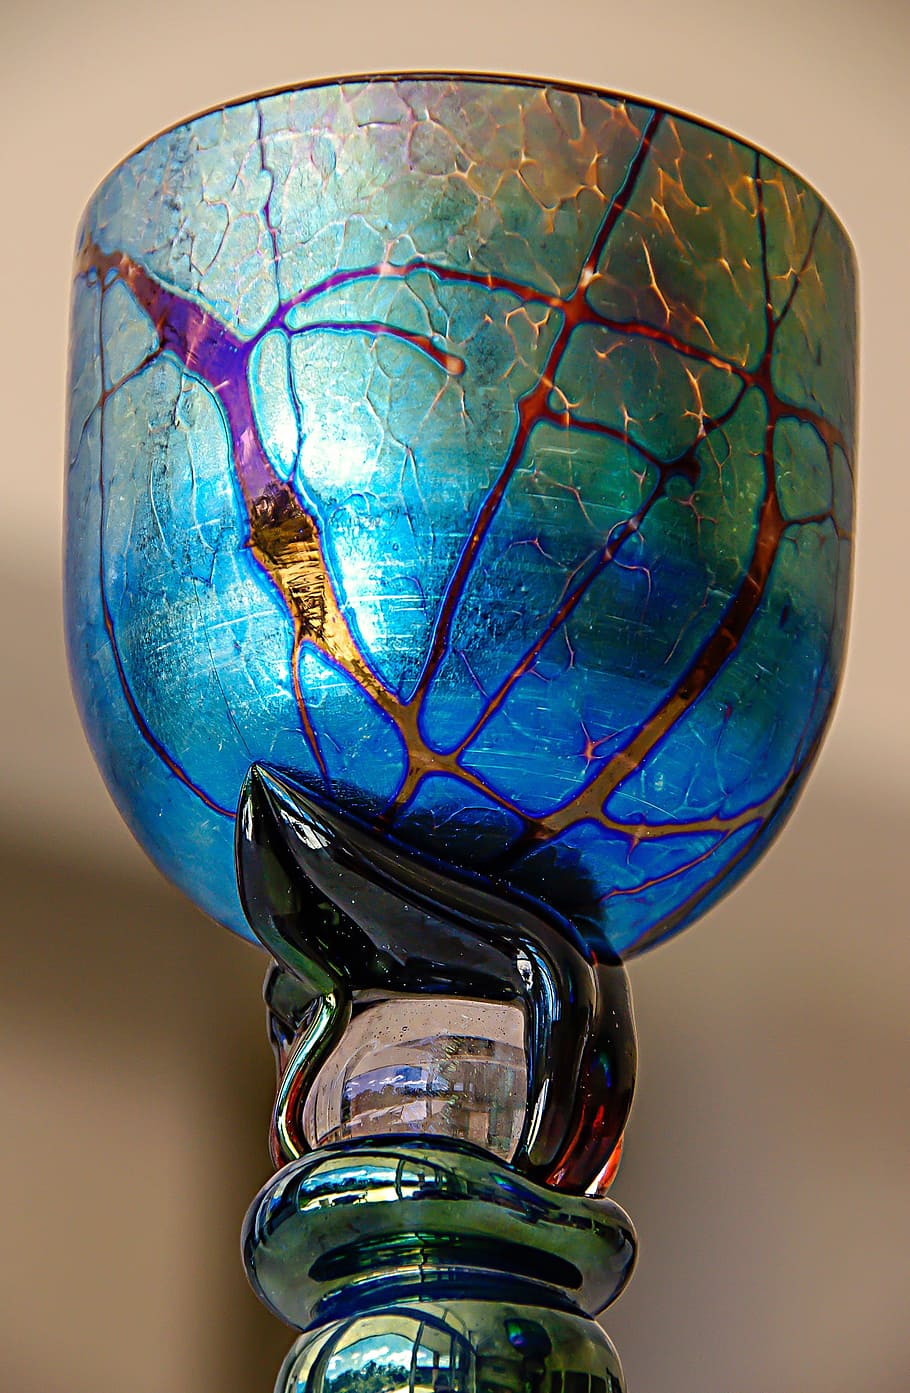 goblet, glass, art, multicoloured, iridescent, modern, bright, close-up, indoors, globe - man made object